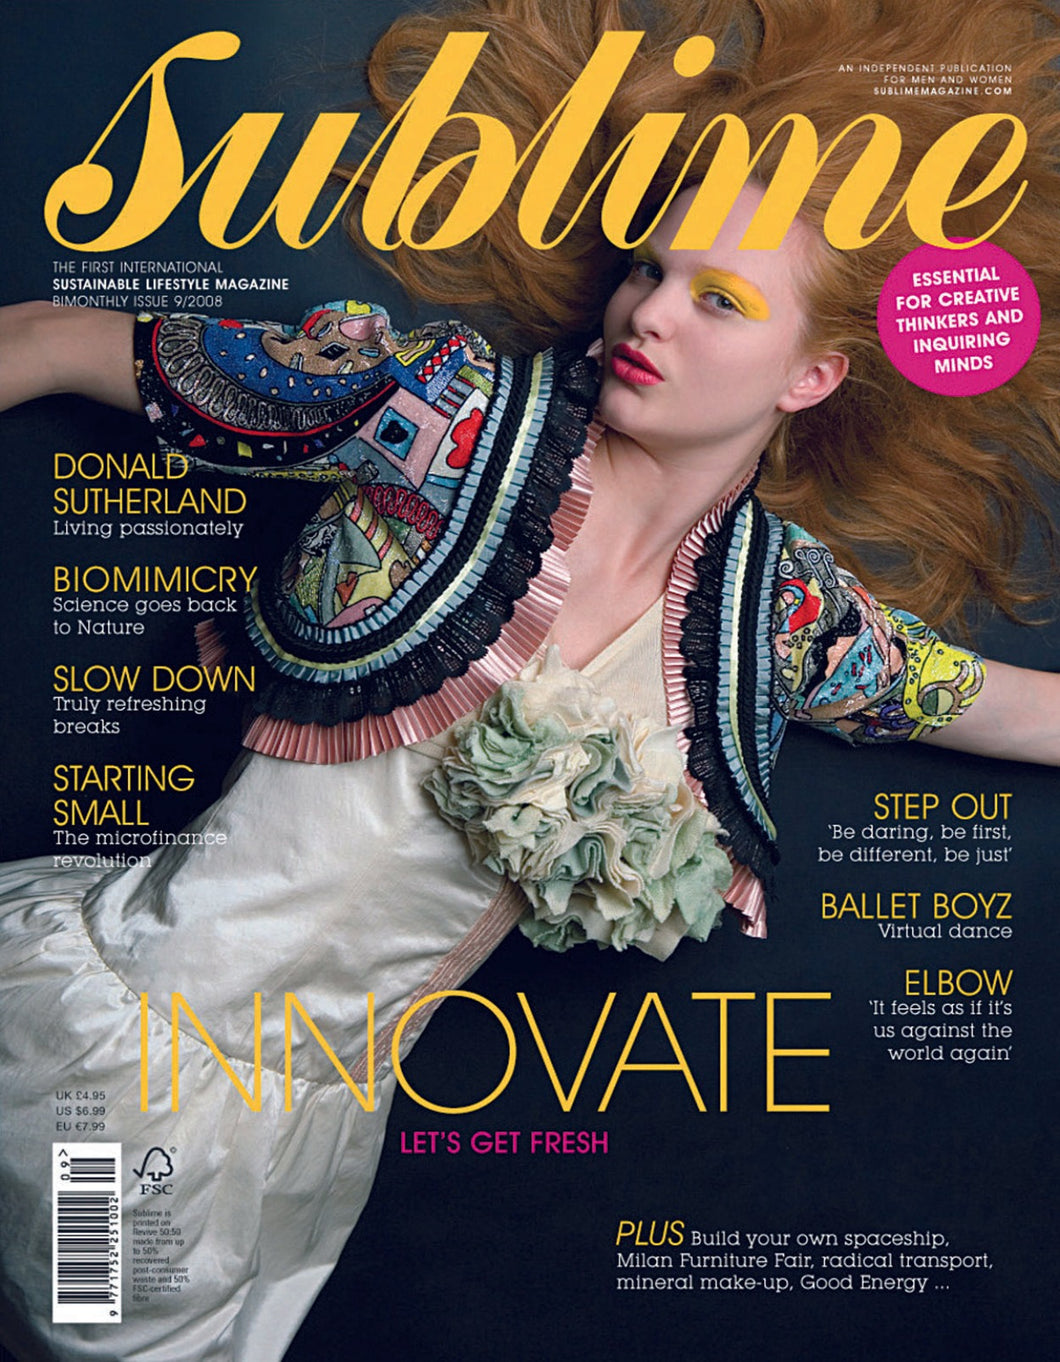 Issue 9 - Innovate